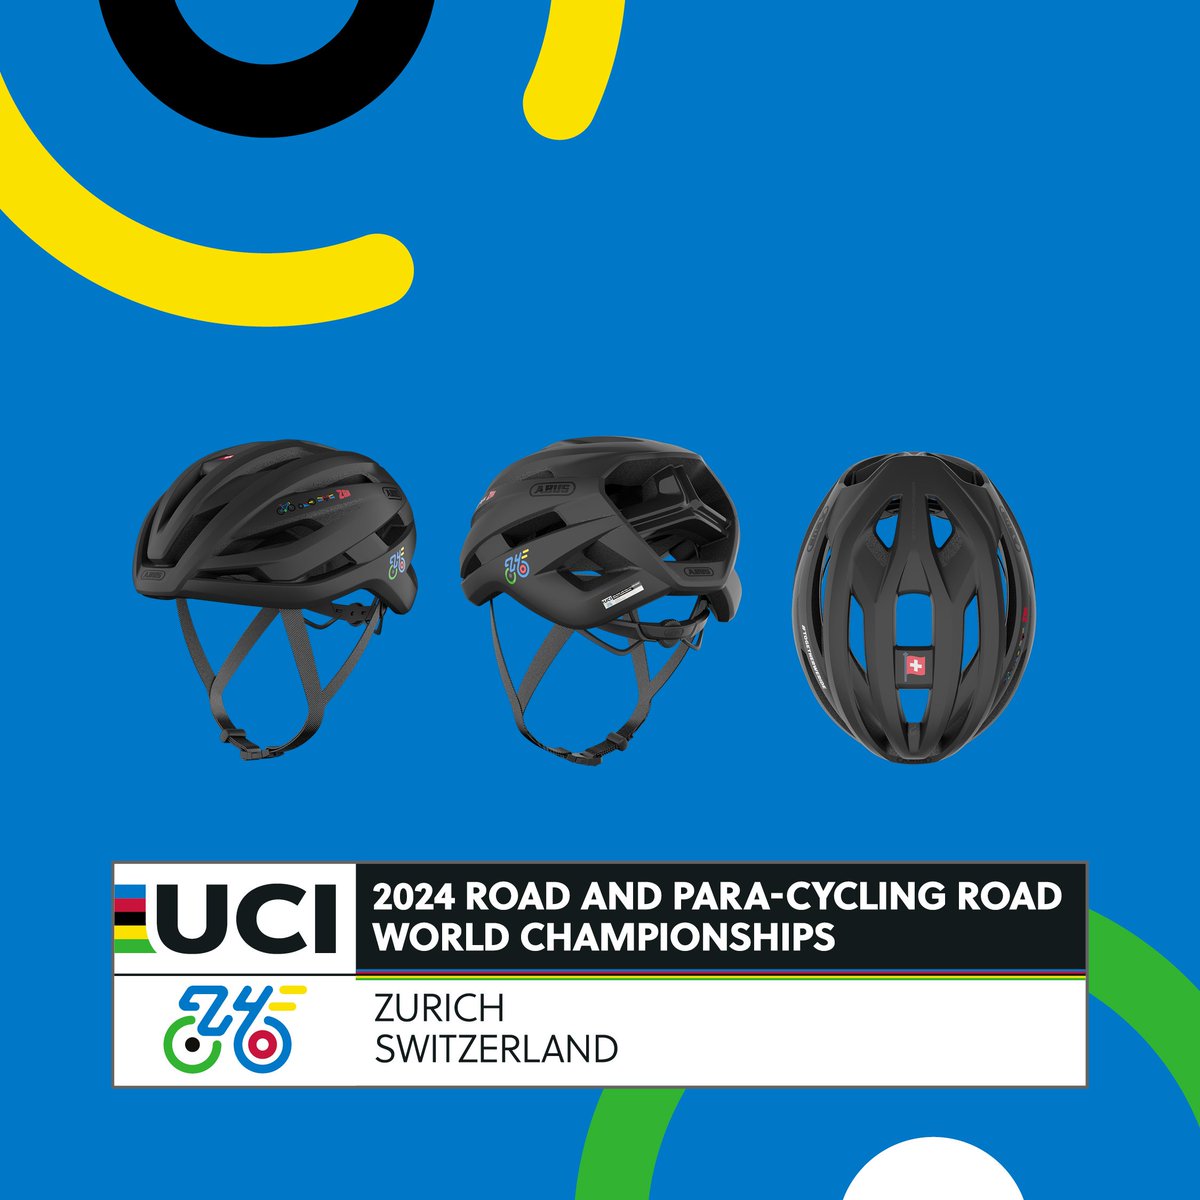 ABUS joins the Zurich 2024 family: As the Official Supplier for the UCI Road and Para-cycling Road World Championships in Zurich, ABUS focuses on safety – with secure bike parkings for everyone and exclusive helmets for our volunteers 💥 #TogetherWeRide #zurich2024